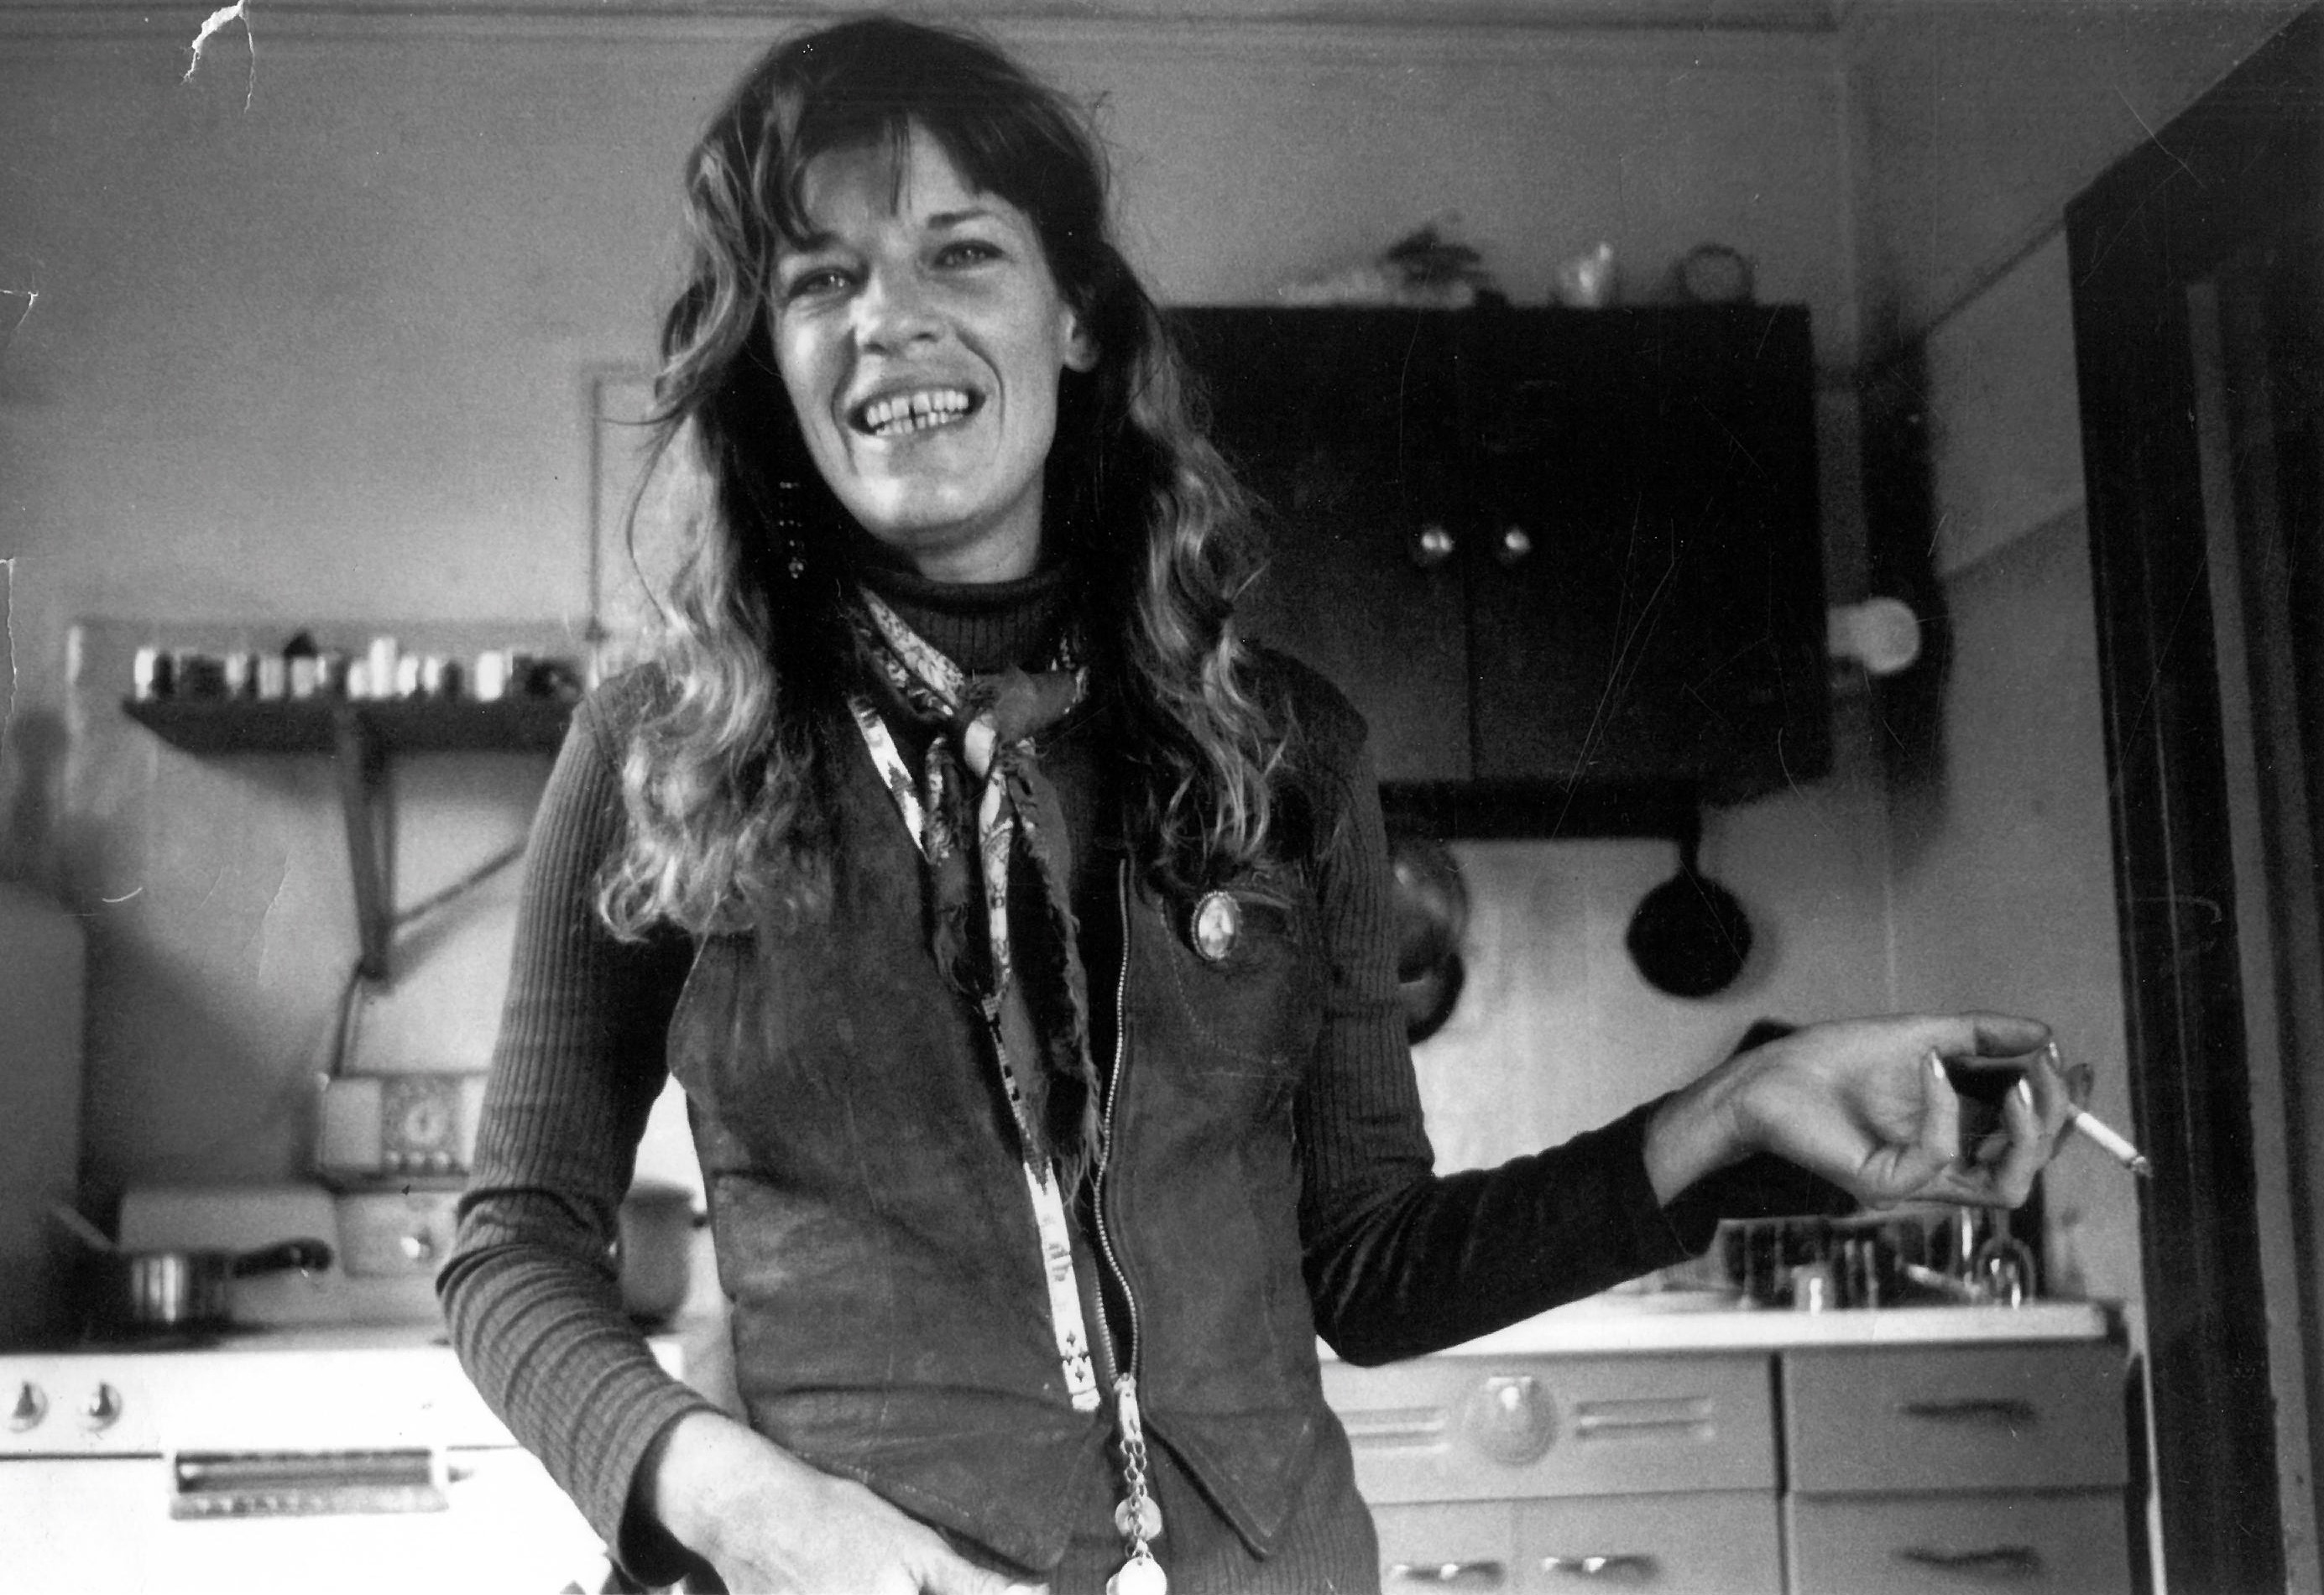 Marjorie Sharp, Portland poet and notorious wild woman in 1970s, tried to make life an art form pic